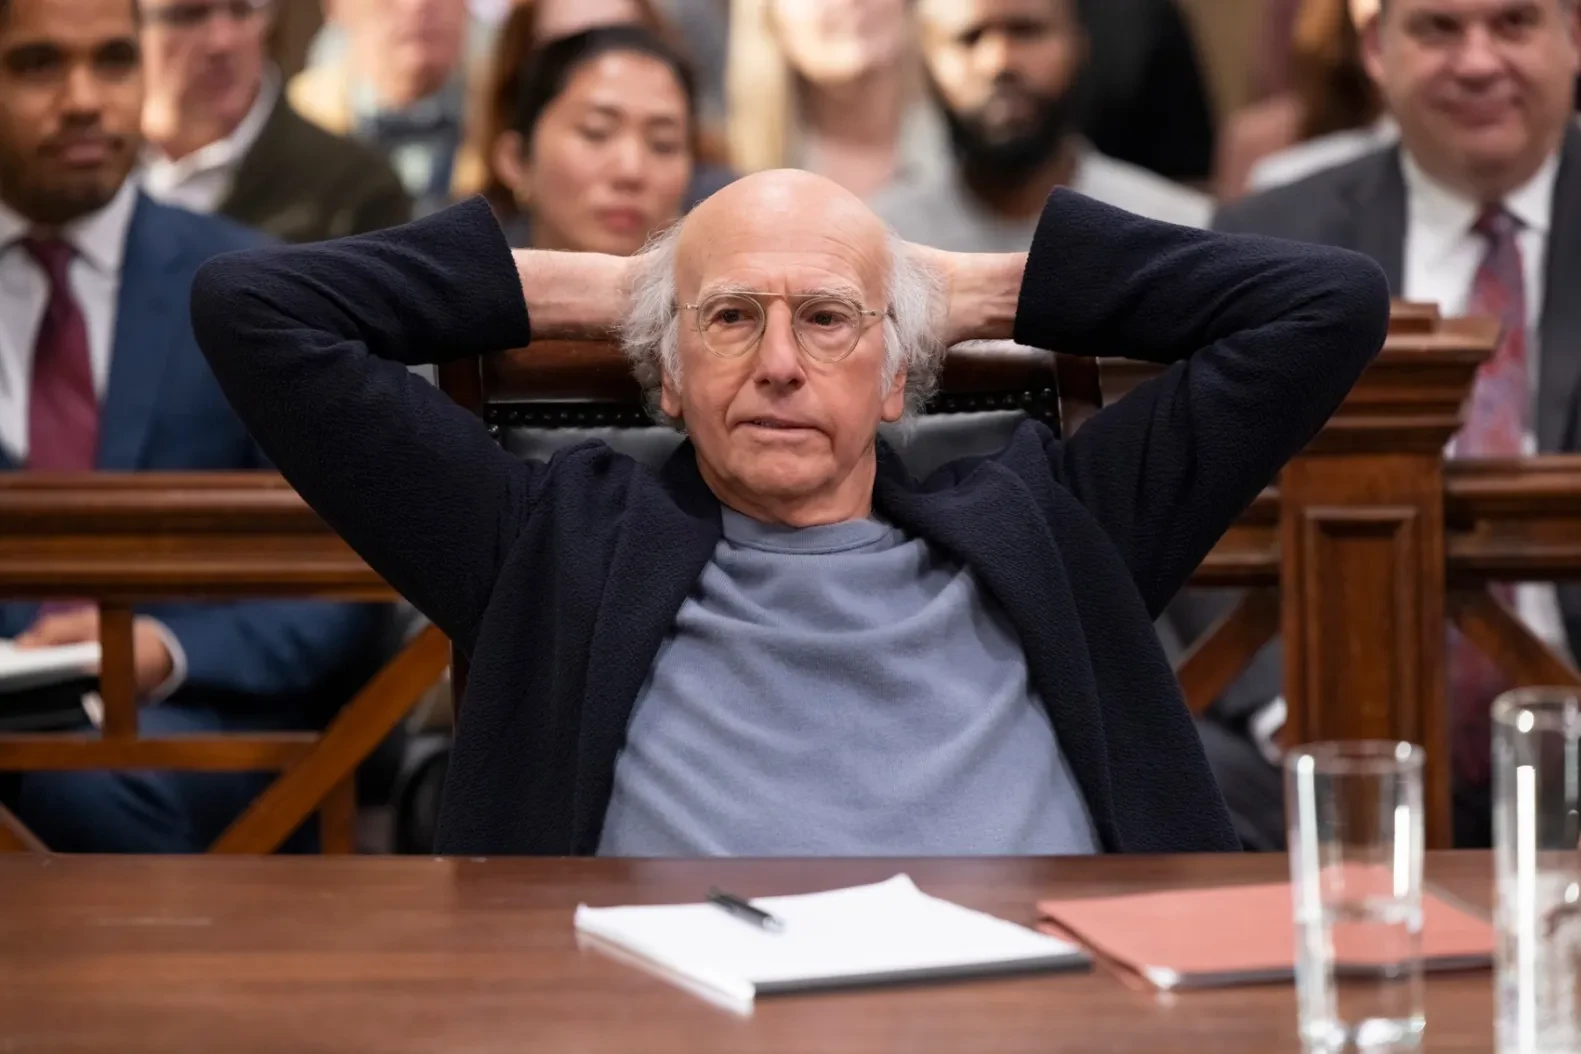 Larry David in a still from Curb Your Enthusiasm's 12th season